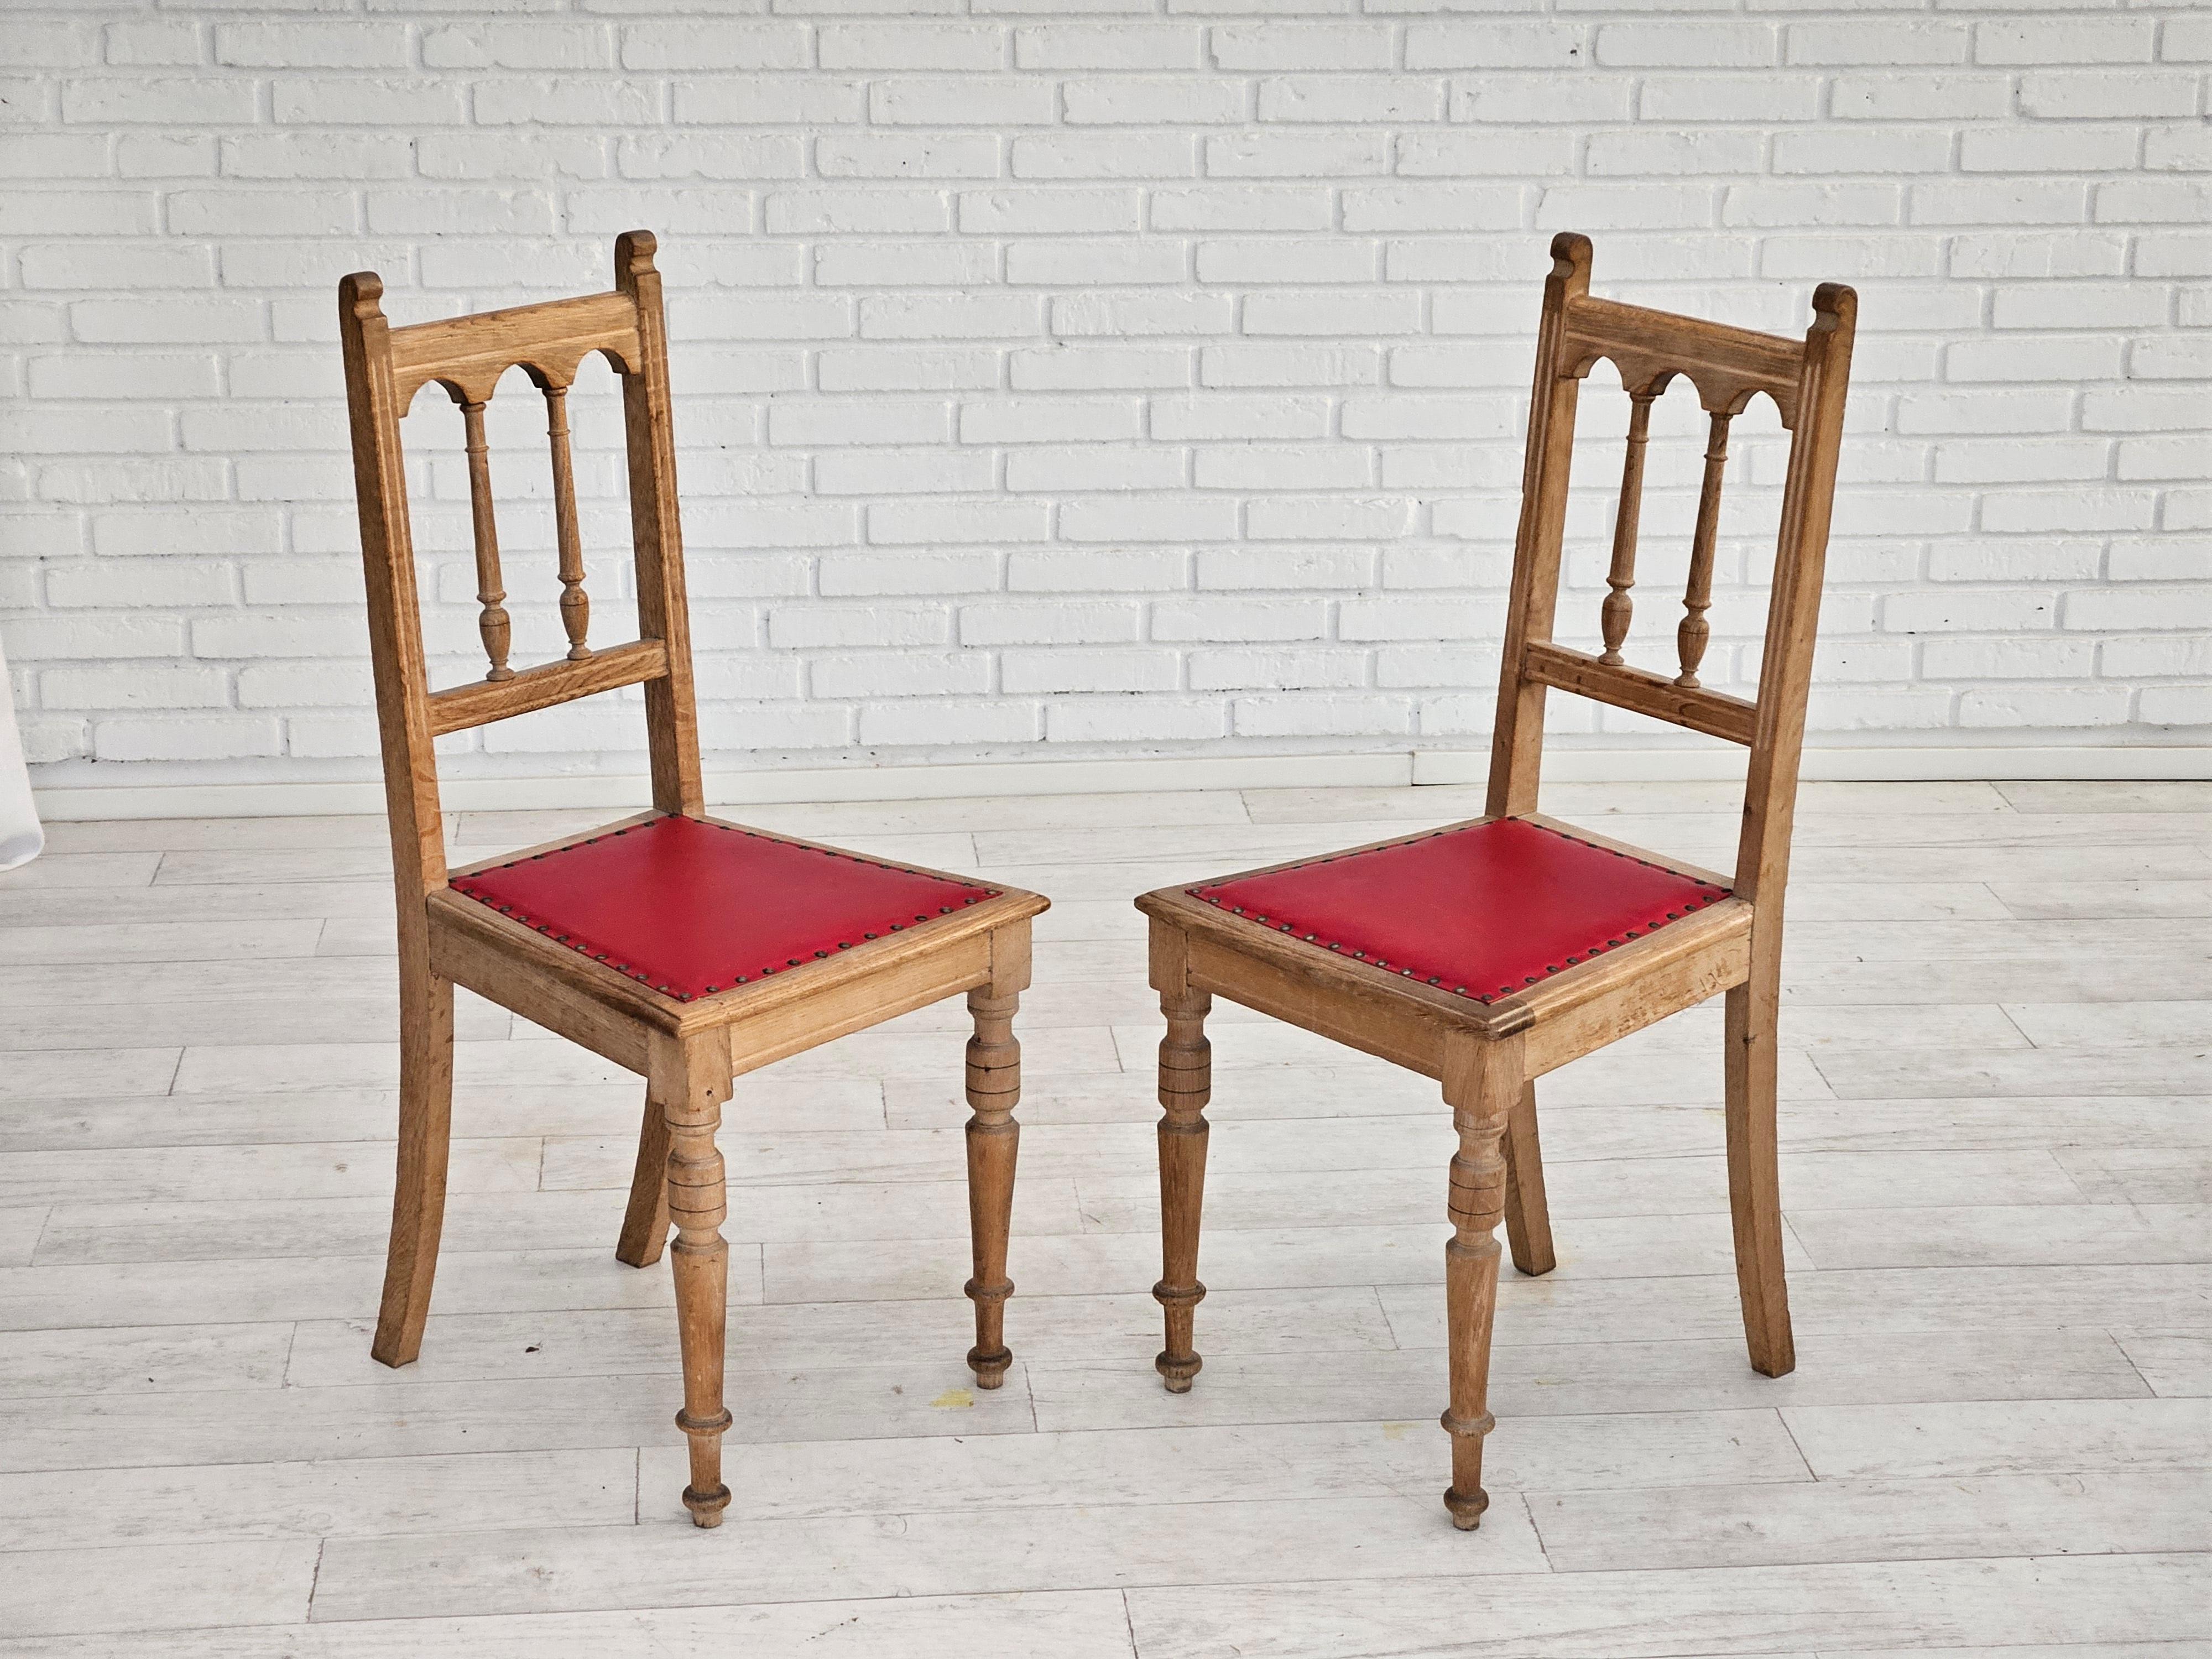 1950s, set of 2 pcs Danish dining chairs. Original very good condition: no smells and no stains. Furniture leather fabric, oak wood. Manufactured by Danish furniture manufacturer in about 1950s.